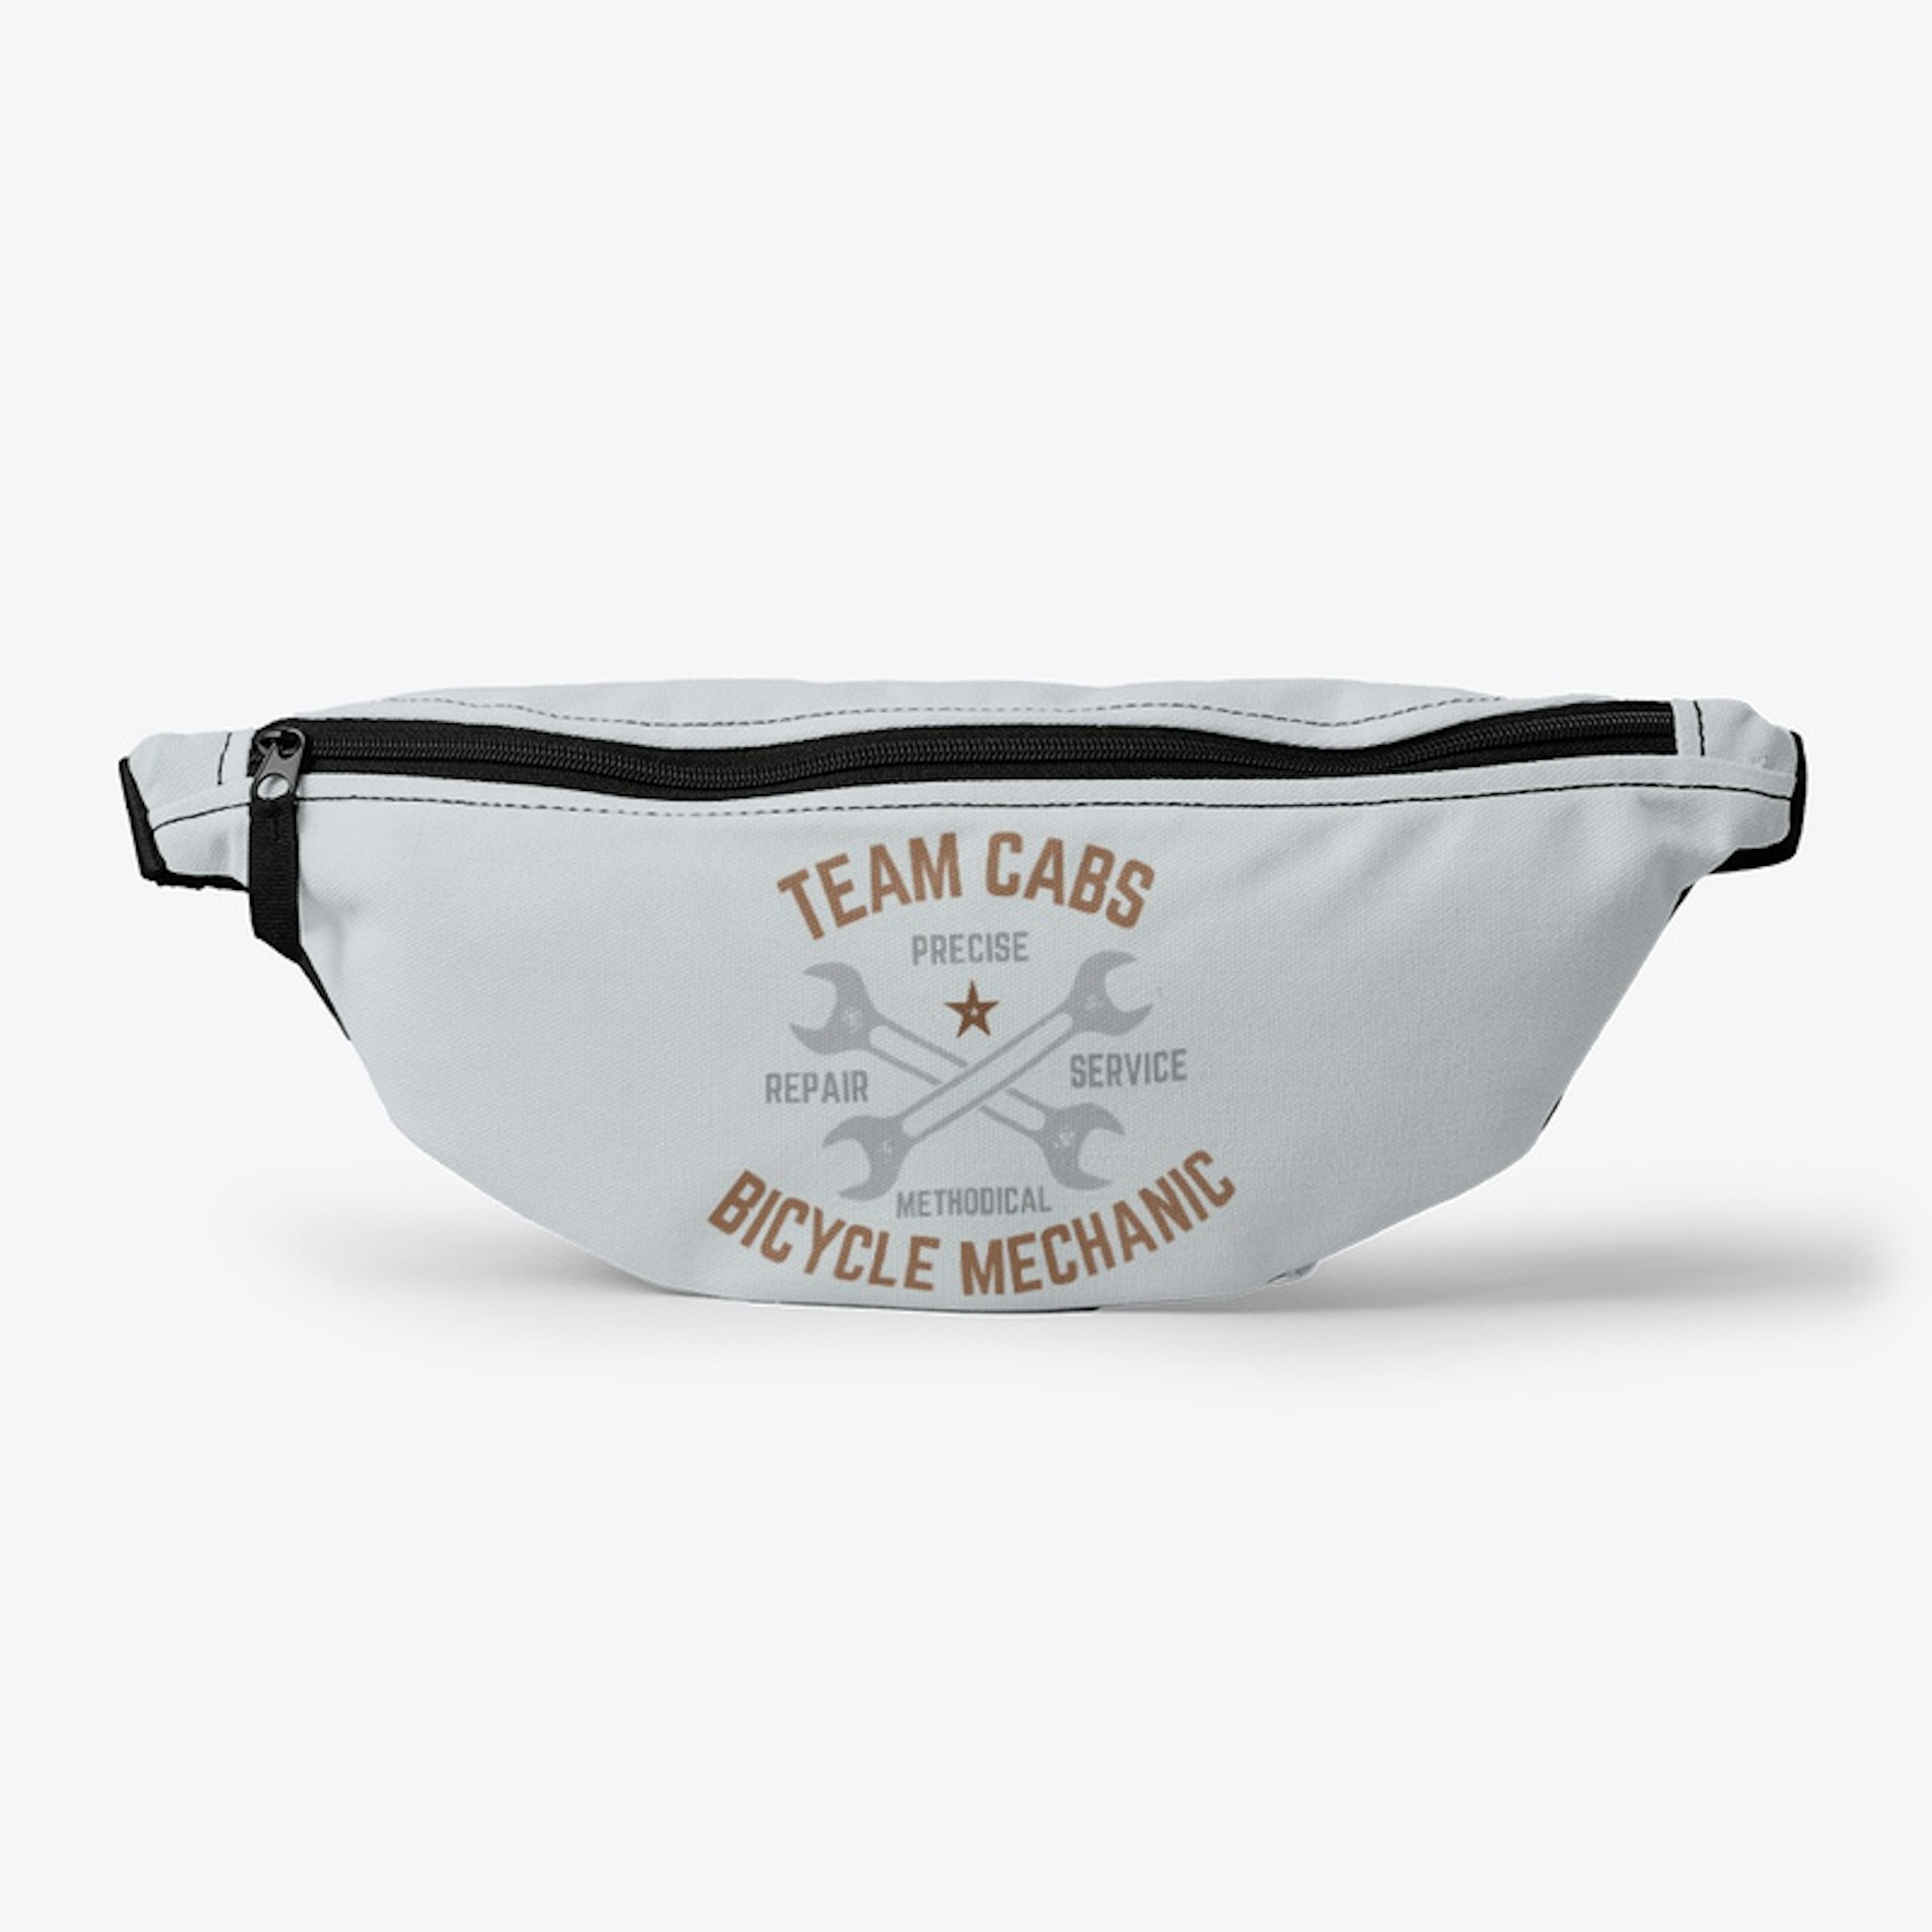 Team CABS Fanny Pack